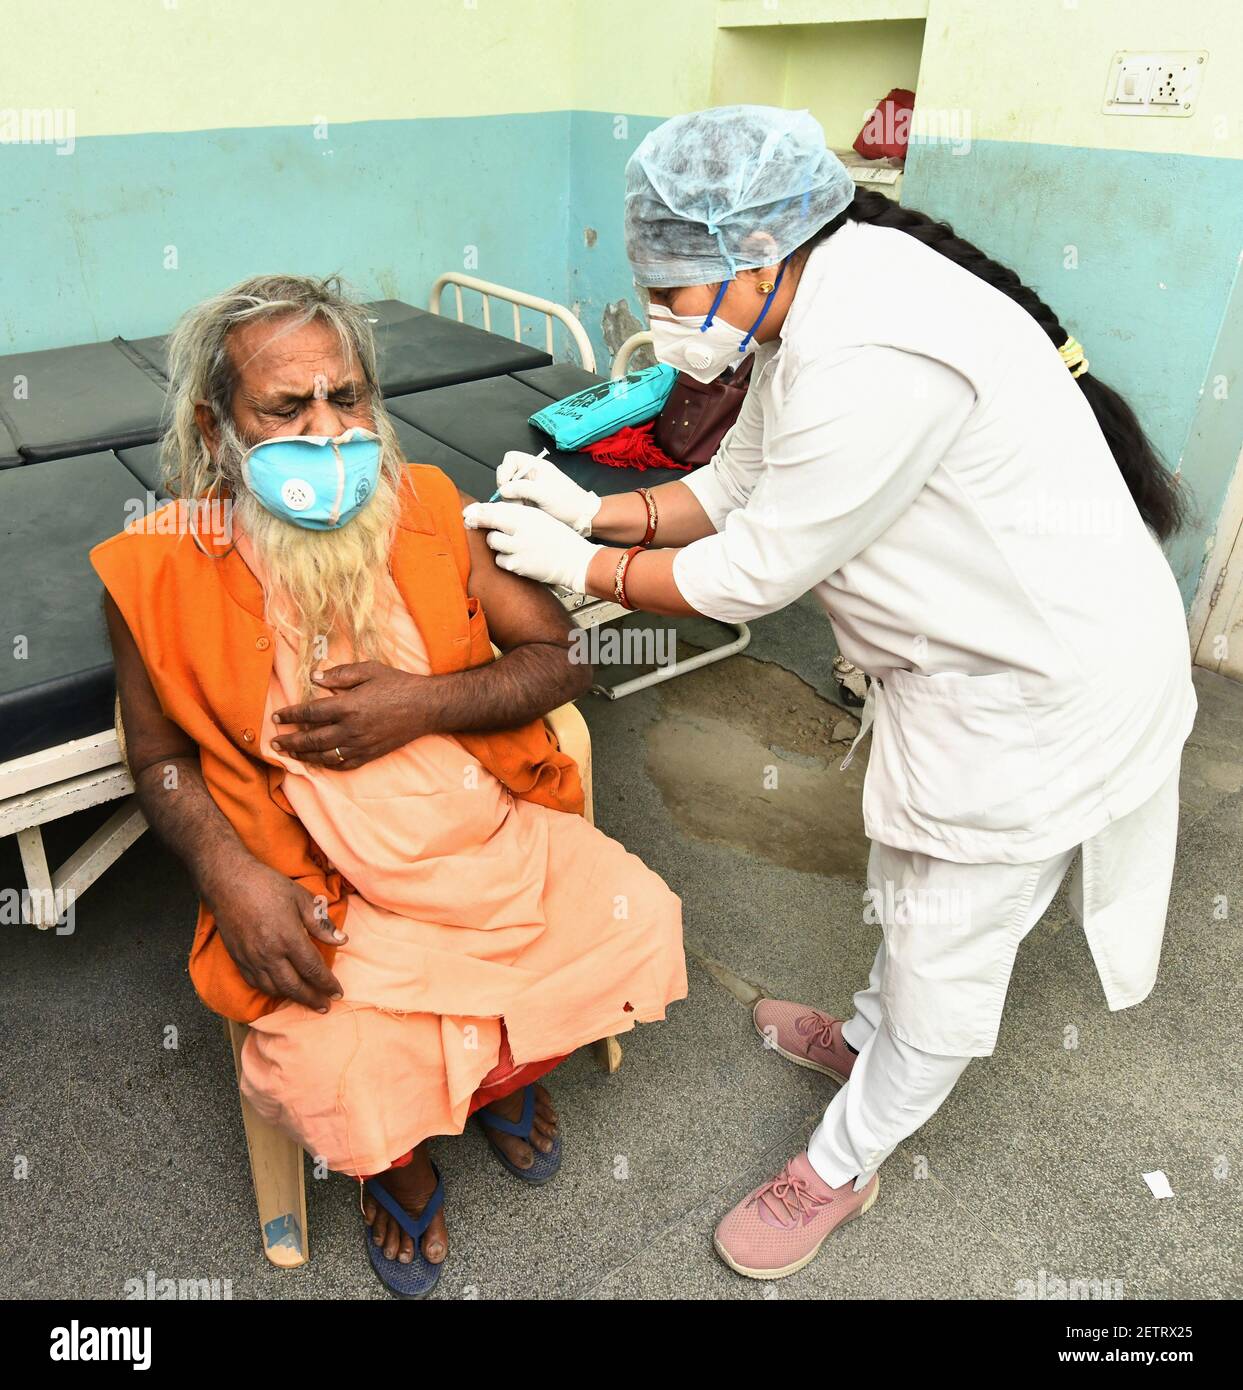 Beawar, Rajasthan, India, March 2, 2021: An elderly monk being administered COVID-19 vaccine, during a countrywide inoculation drive, at Government hospital in Beawar. The second phase of the Covid-19 vaccination drive started for people 60 years of age and above. 70 years old Indian Prime Minister Narendra Modi also received his first dose of Corona vaccine at AIIMS in New Delhi on Monday. Credit: Sumit Saraswat/Alamy Live News Stock Photo